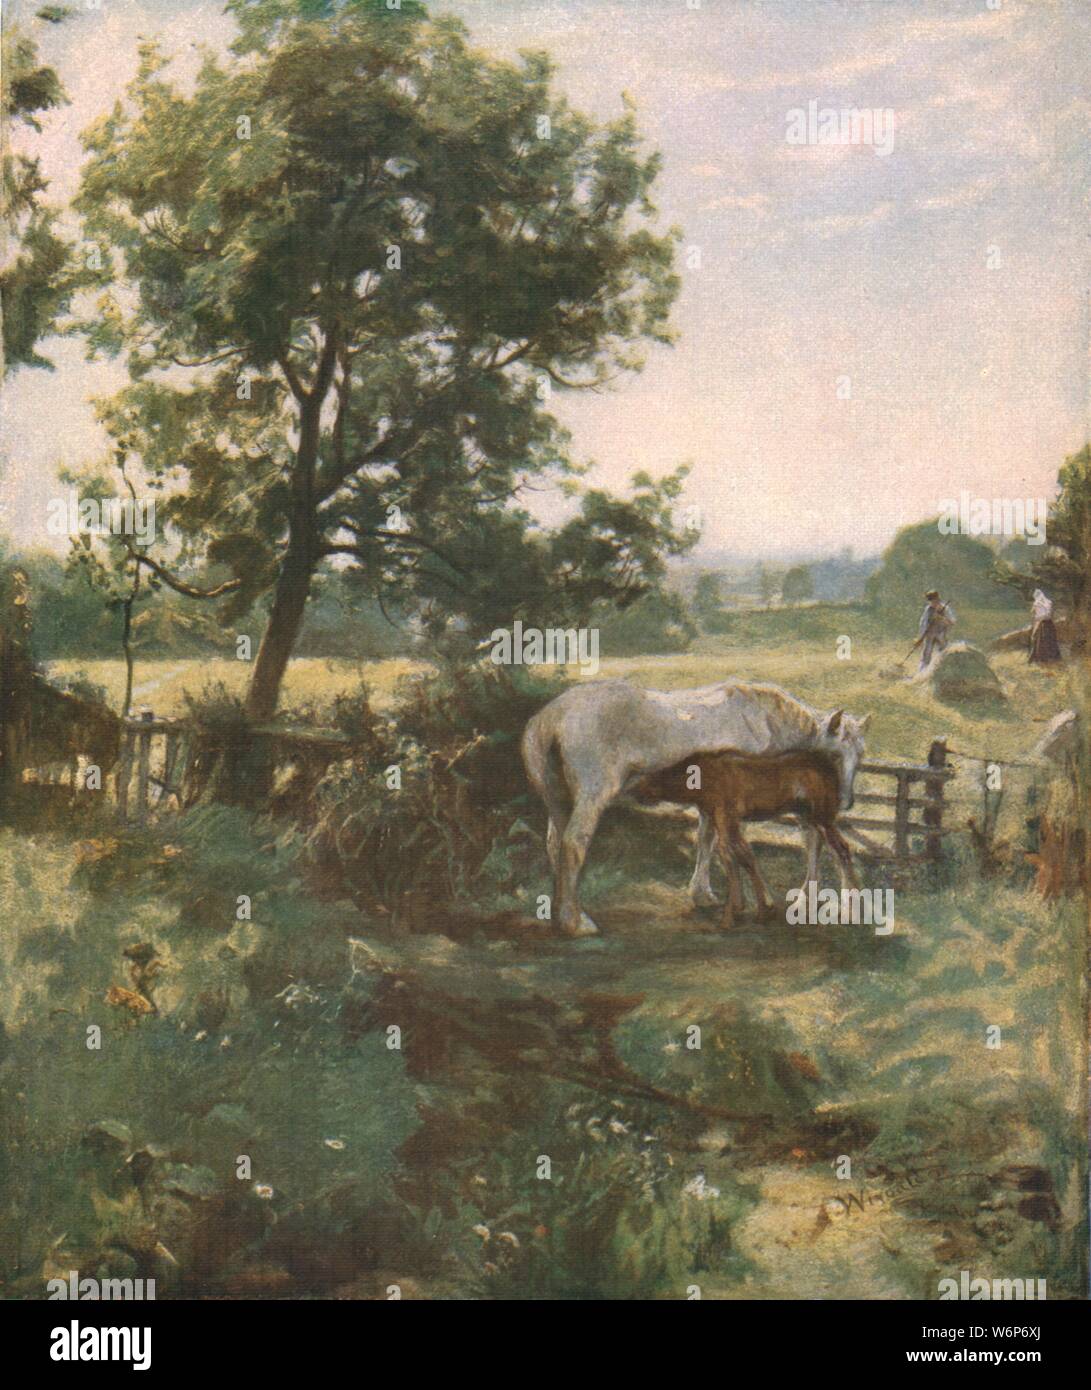 'Summertime', late 19th-early 20th century, (c1930). Mare and foal in the shade, with farm workers in the distance. From &quot;Modern Masterpieces of British Art&quot;. [The Amalgamated Press Ltd., London, c1930] Stock Photo